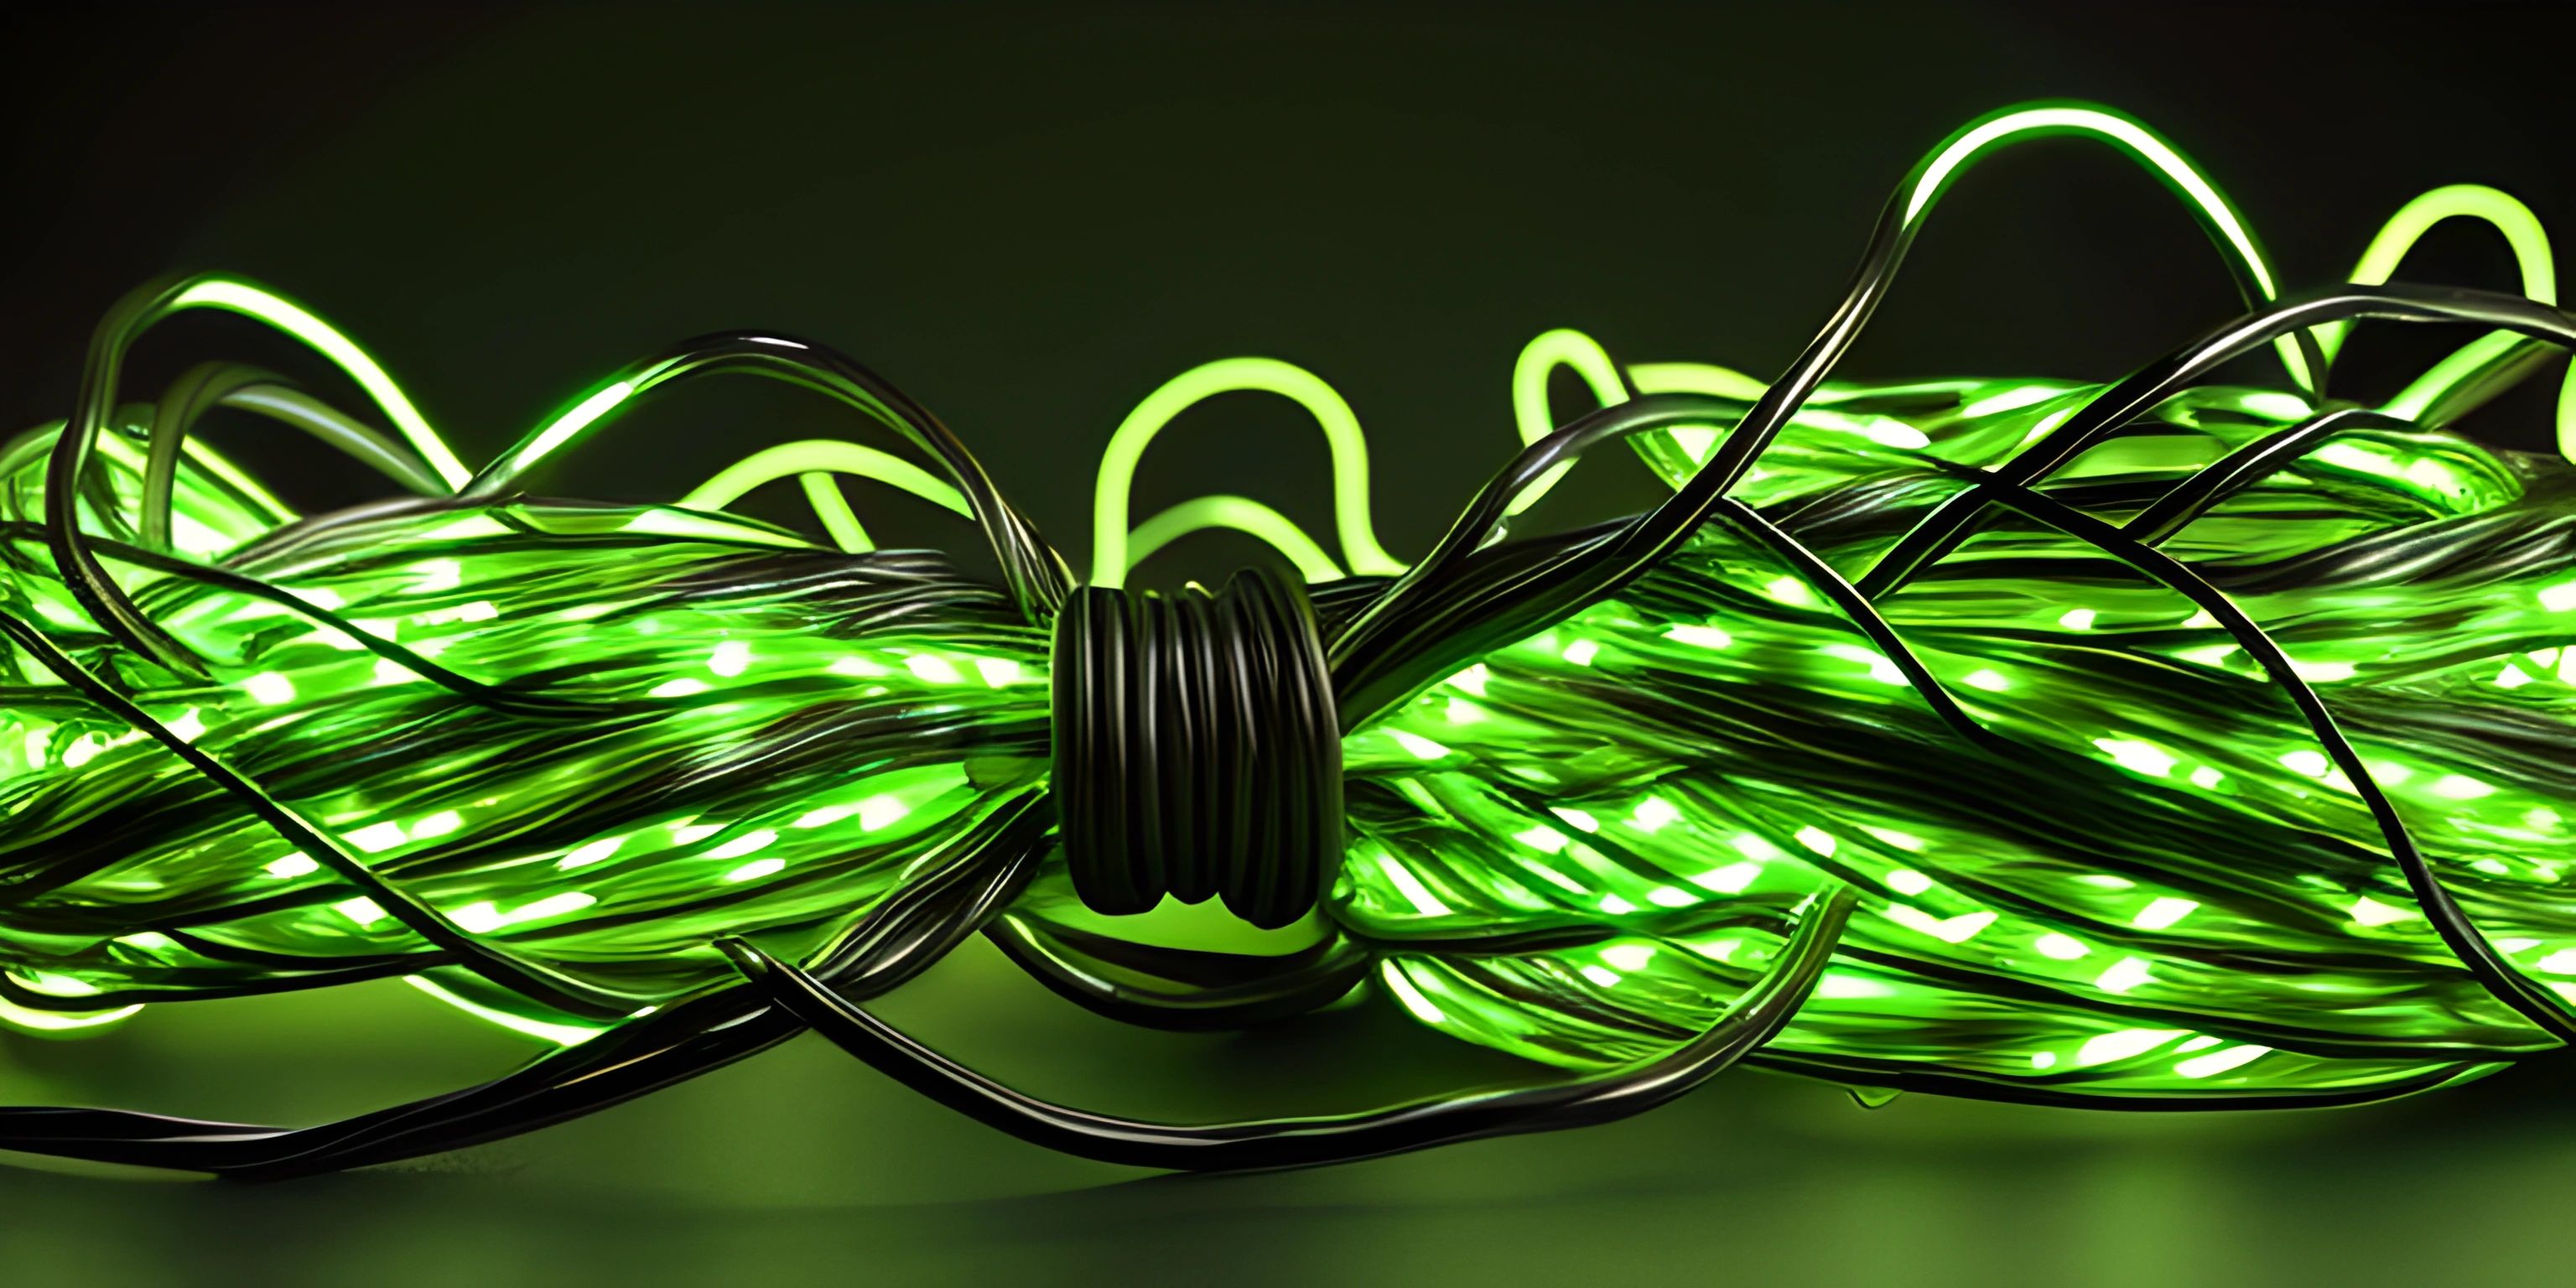 a strand of green and white led lights against a black background, lighting up the dark